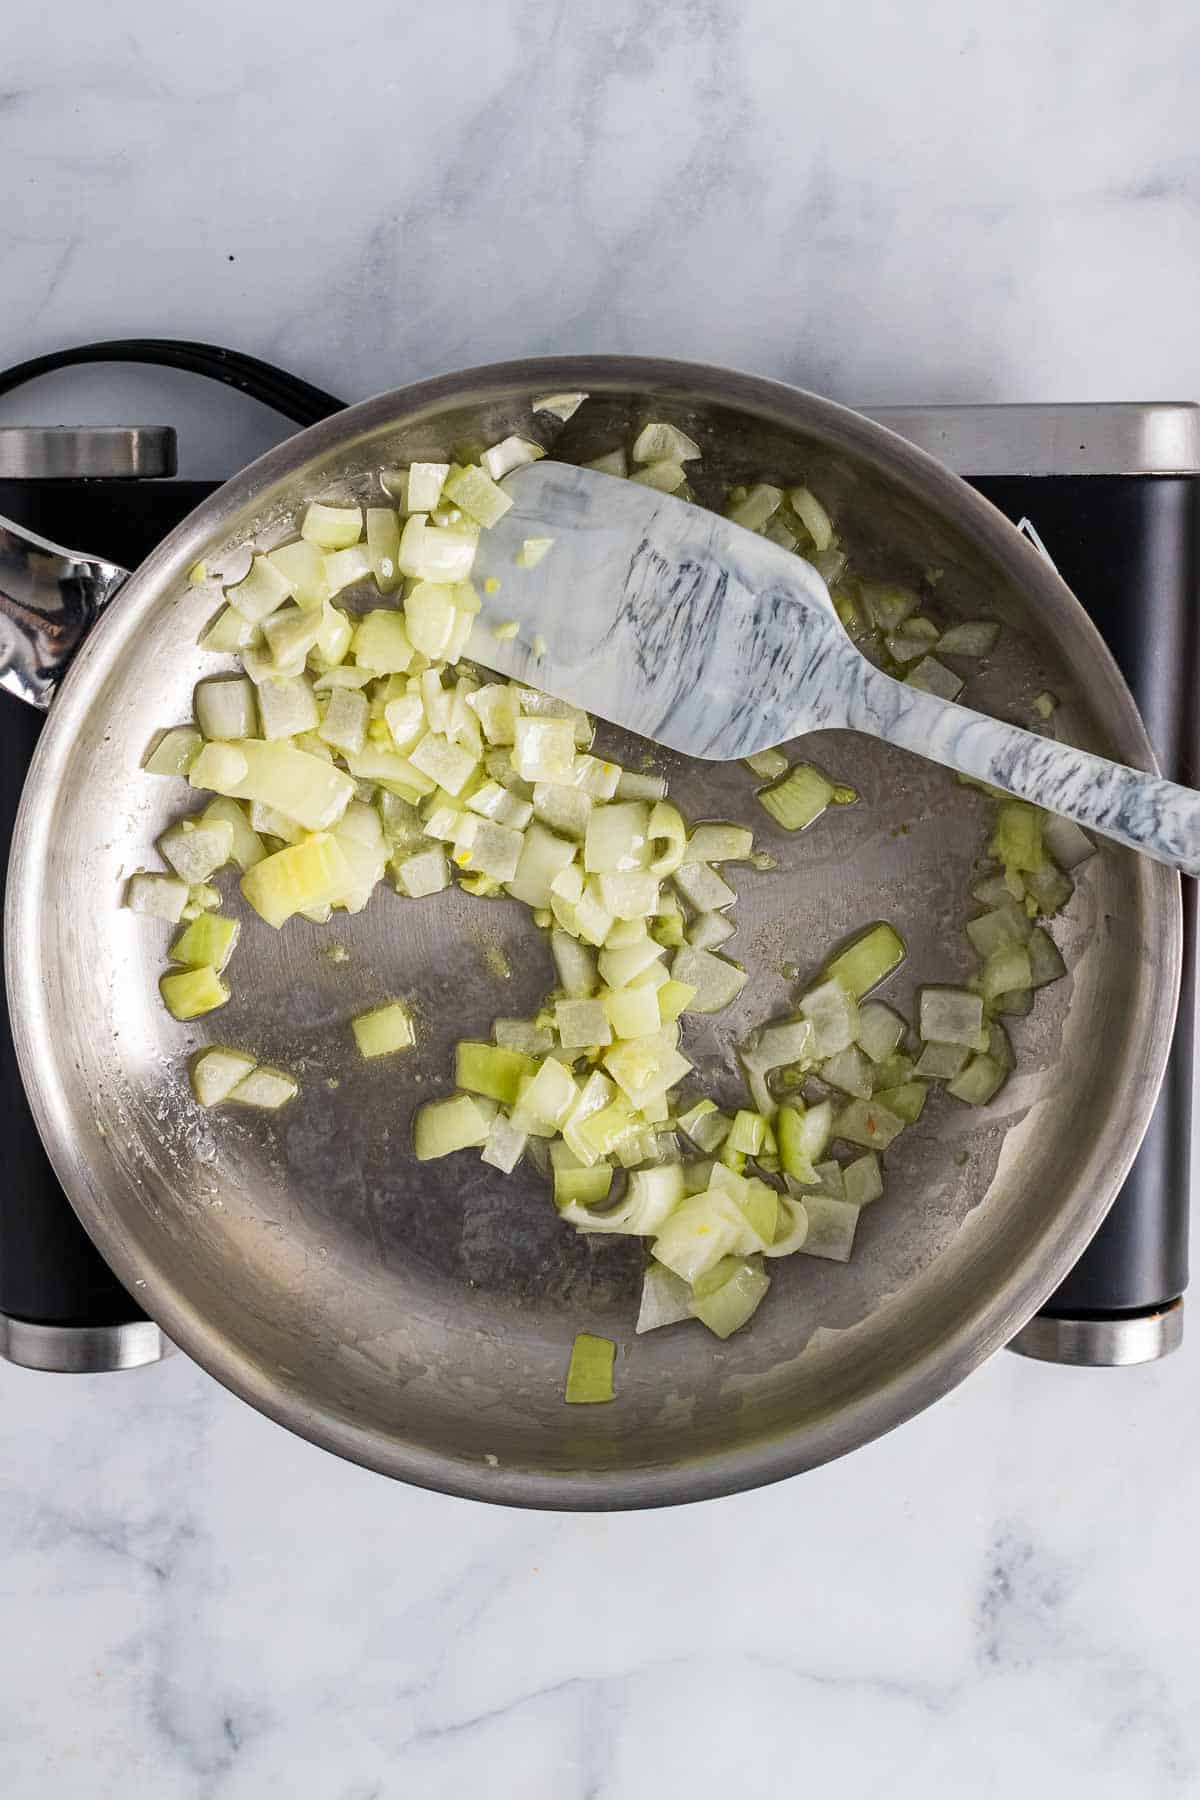 Onion, garlic, and butter cooking in a saute pan, as seen from above